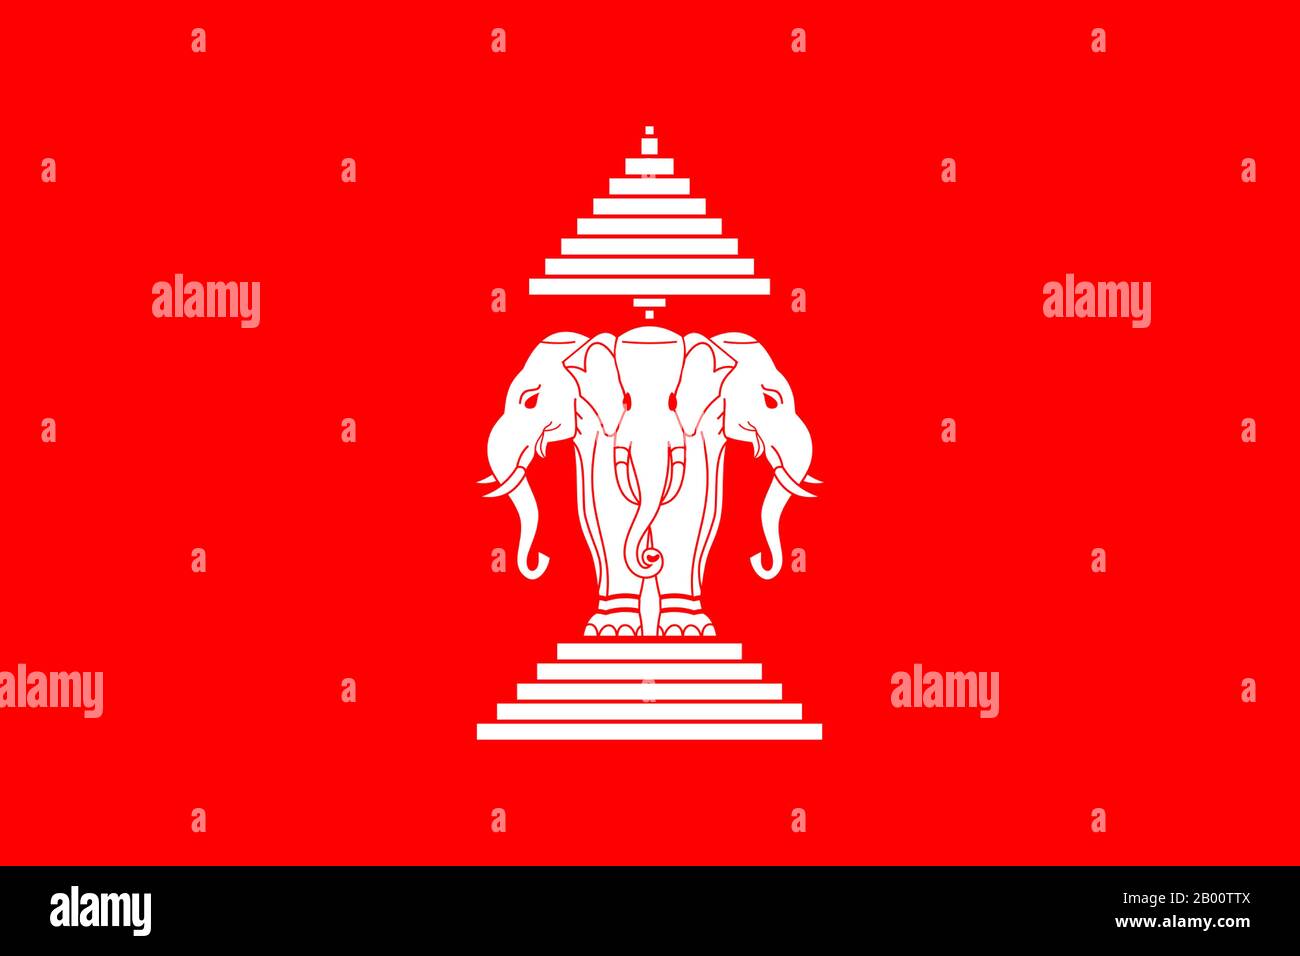 Laos: Flag of the Kingdom of Laos (1952-1975).  From 1952 until the fall of the royal government in 1975 the country had a red flag, with a white three-headed elephant (the god Erawan) in the middle. On top of the elephant is a nine-folded umbrella, while the elephant itself stands on a five-level pedestal. The white elephant is a common royal symbol in Southeast Asia, the three heads referred to the three former kingdoms of Vientiane, Luang Prabang, and Champasak which made up the country. The nine-folded umbrella is also a royal symbol, originating from Mt. Meru in the Buddhist cosmology. Stock Photo